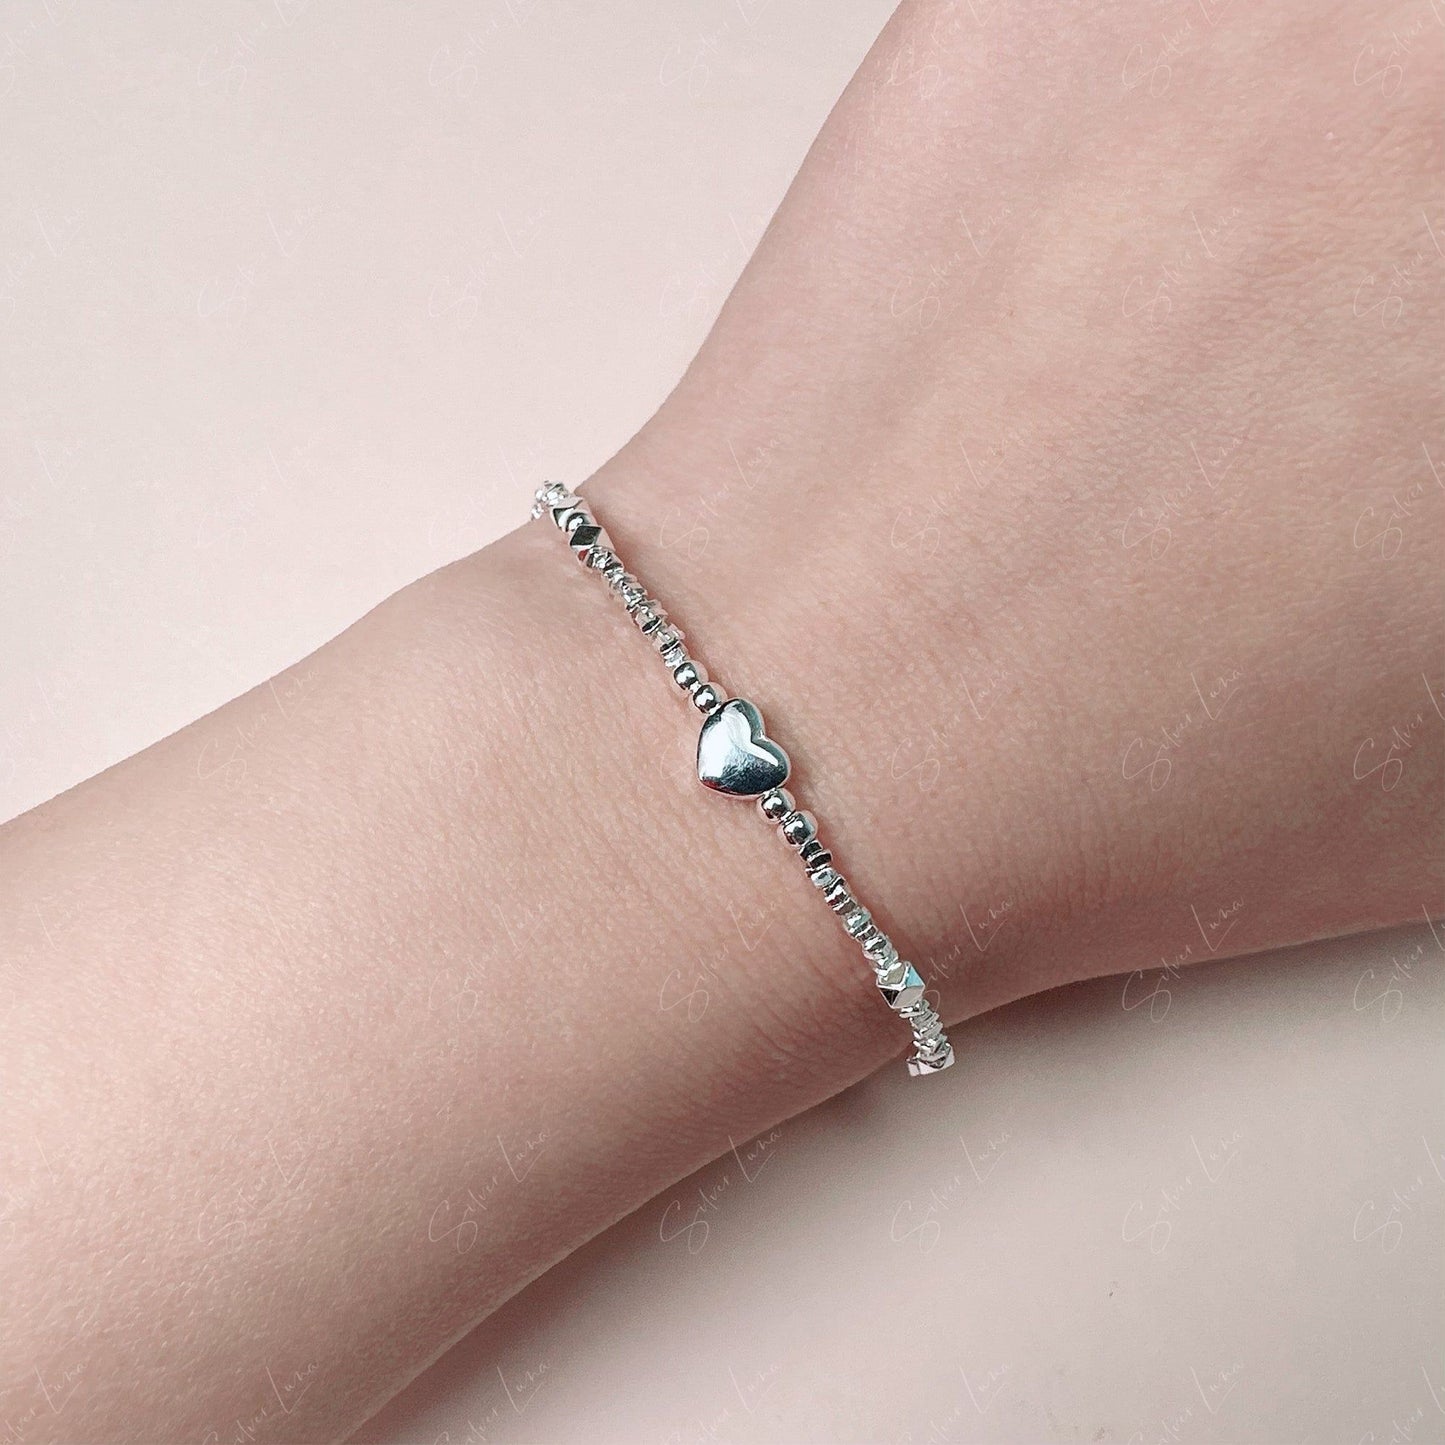 Silver heart and facet bead bracelet